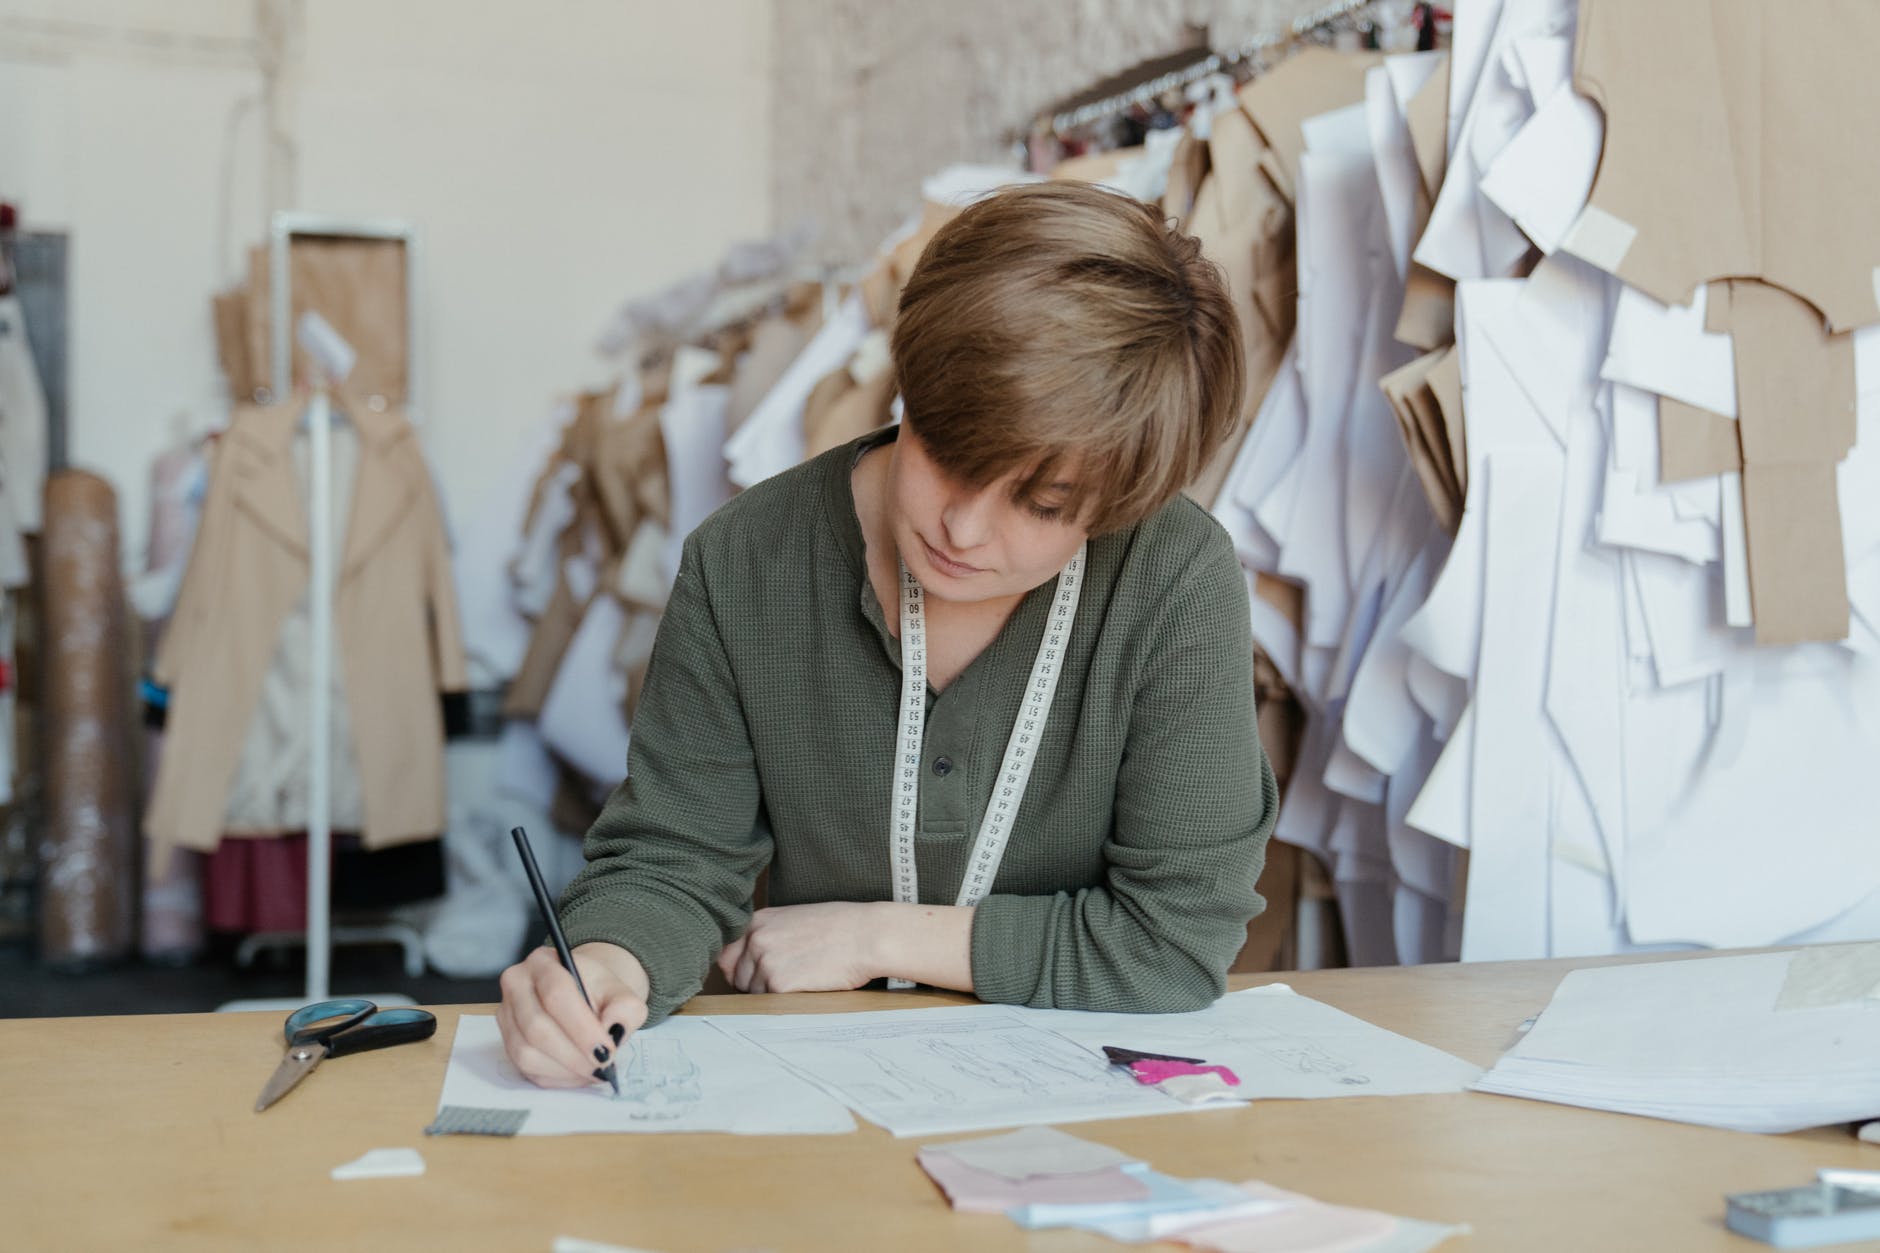 woman in gray cardigan writing on white paper